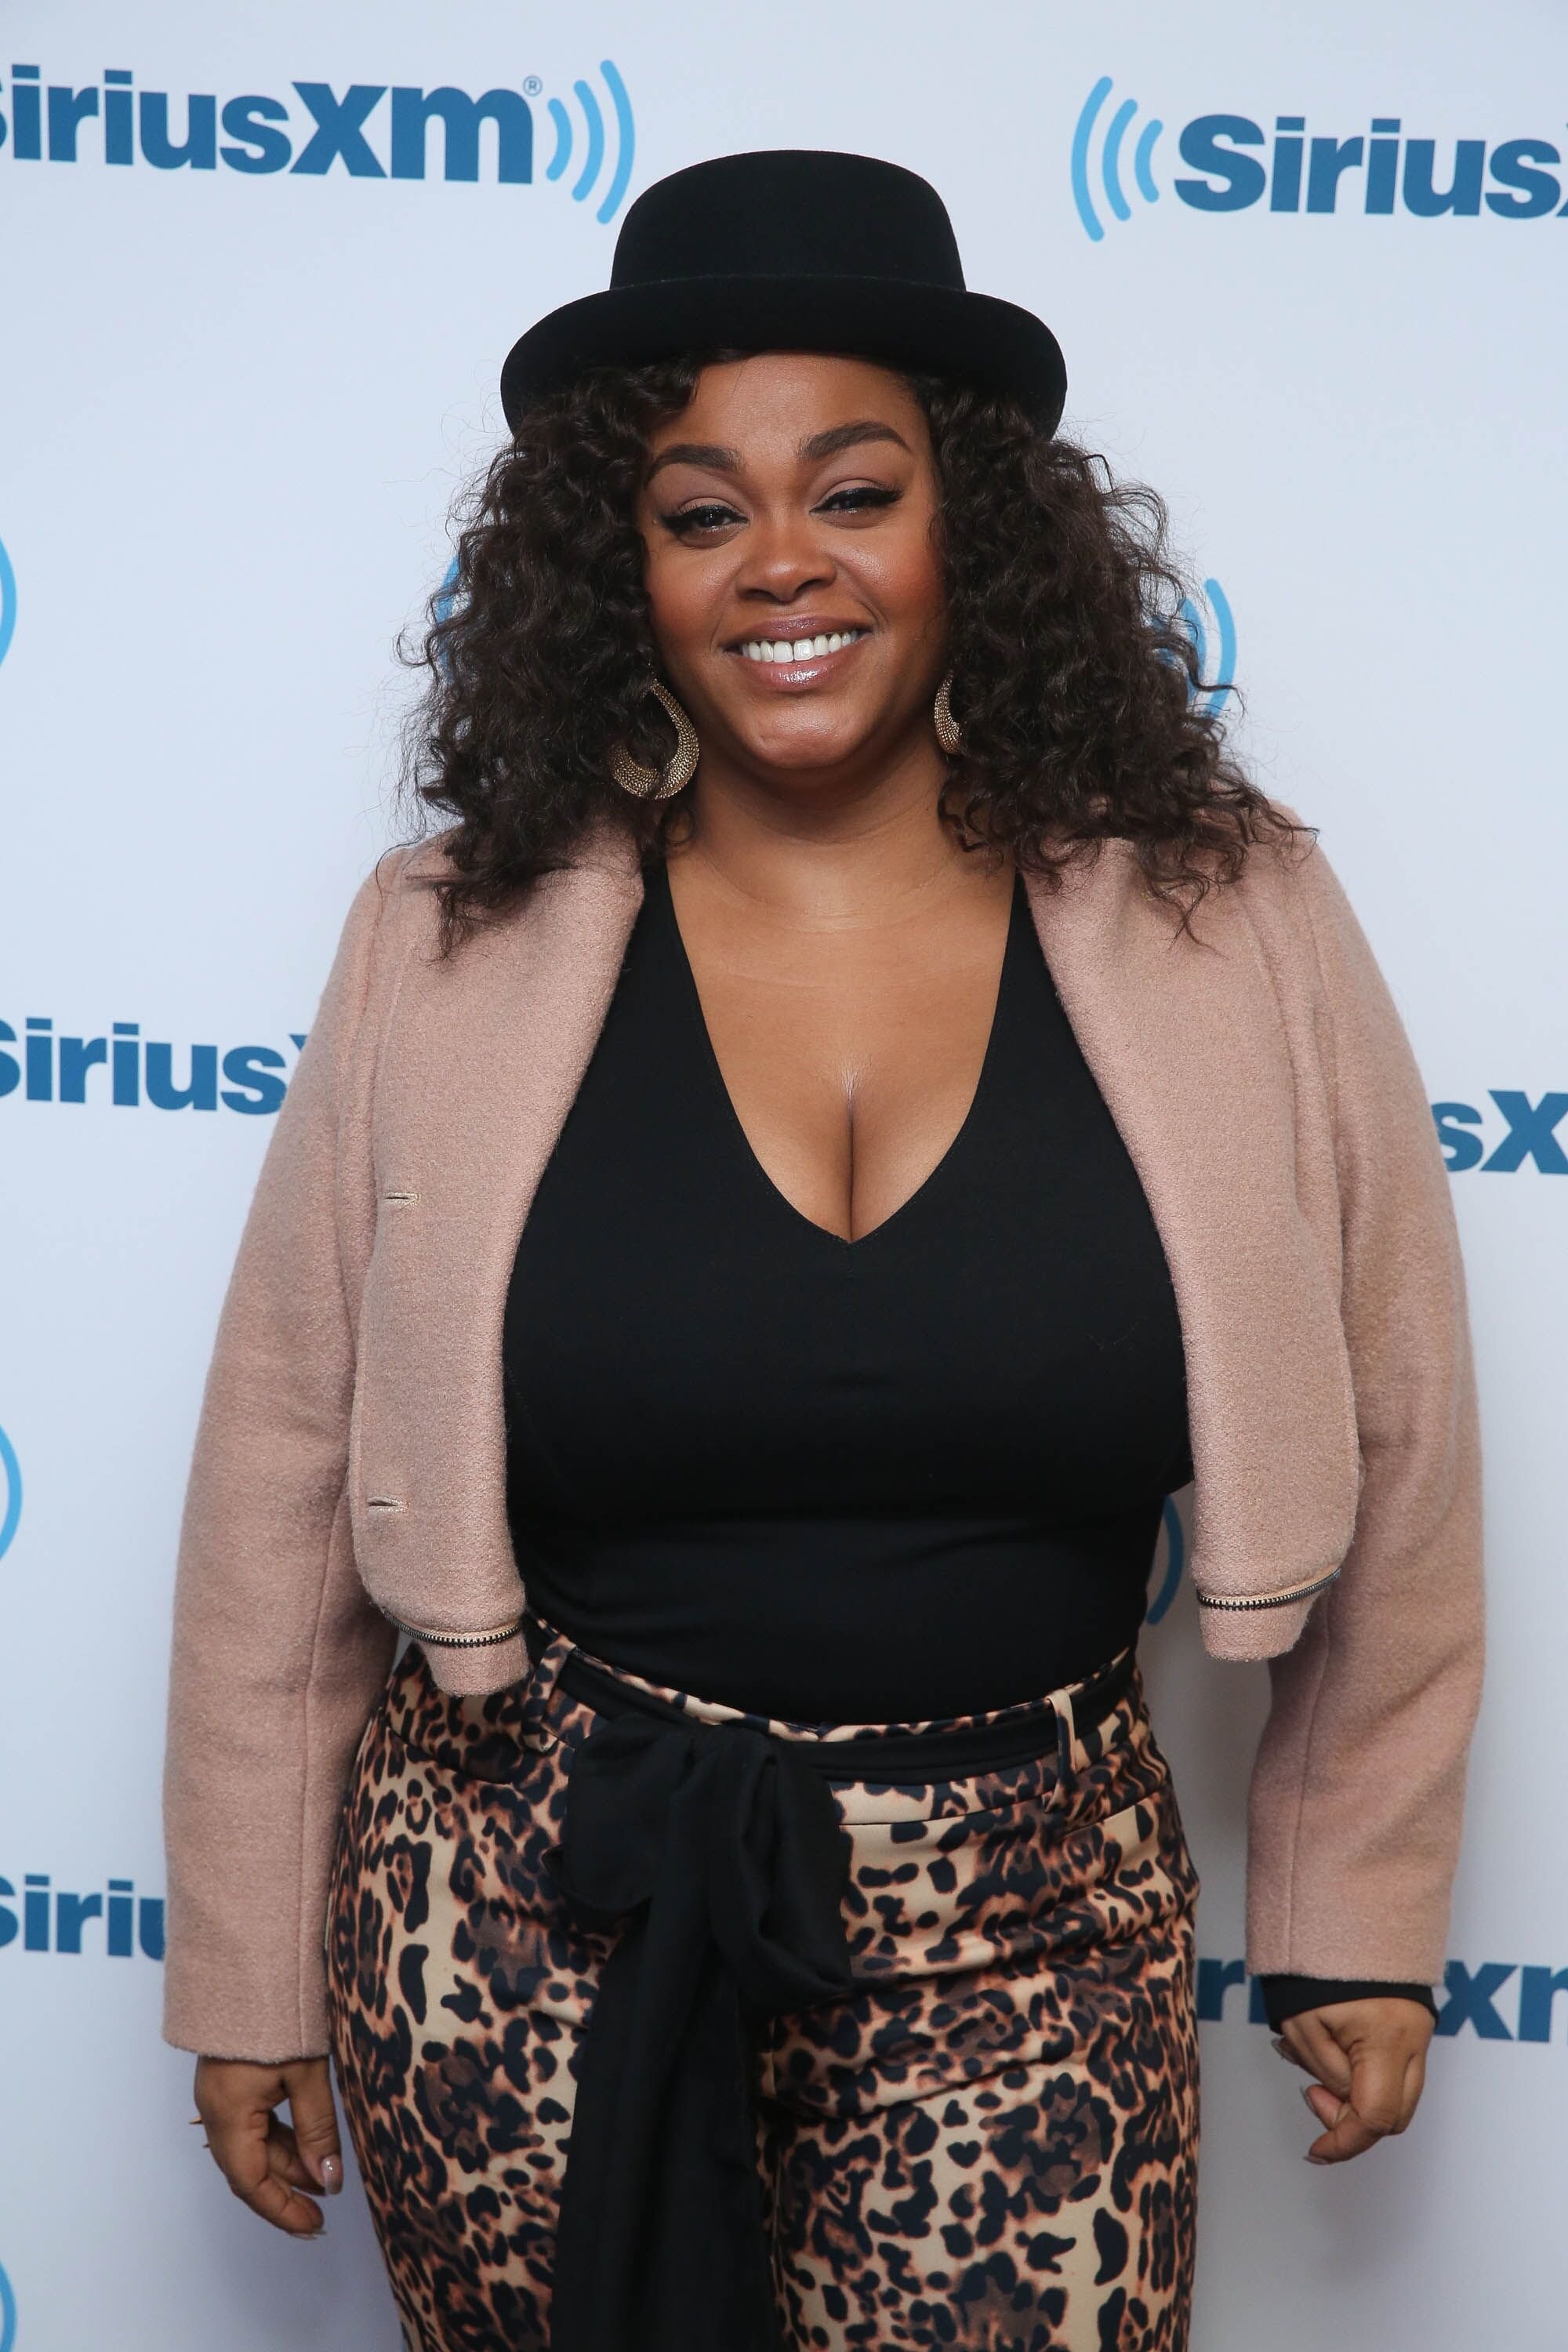  Jill Scott visits at SiriusXM Studios on January 22, 2015 in New York City | Photo: Getty Images